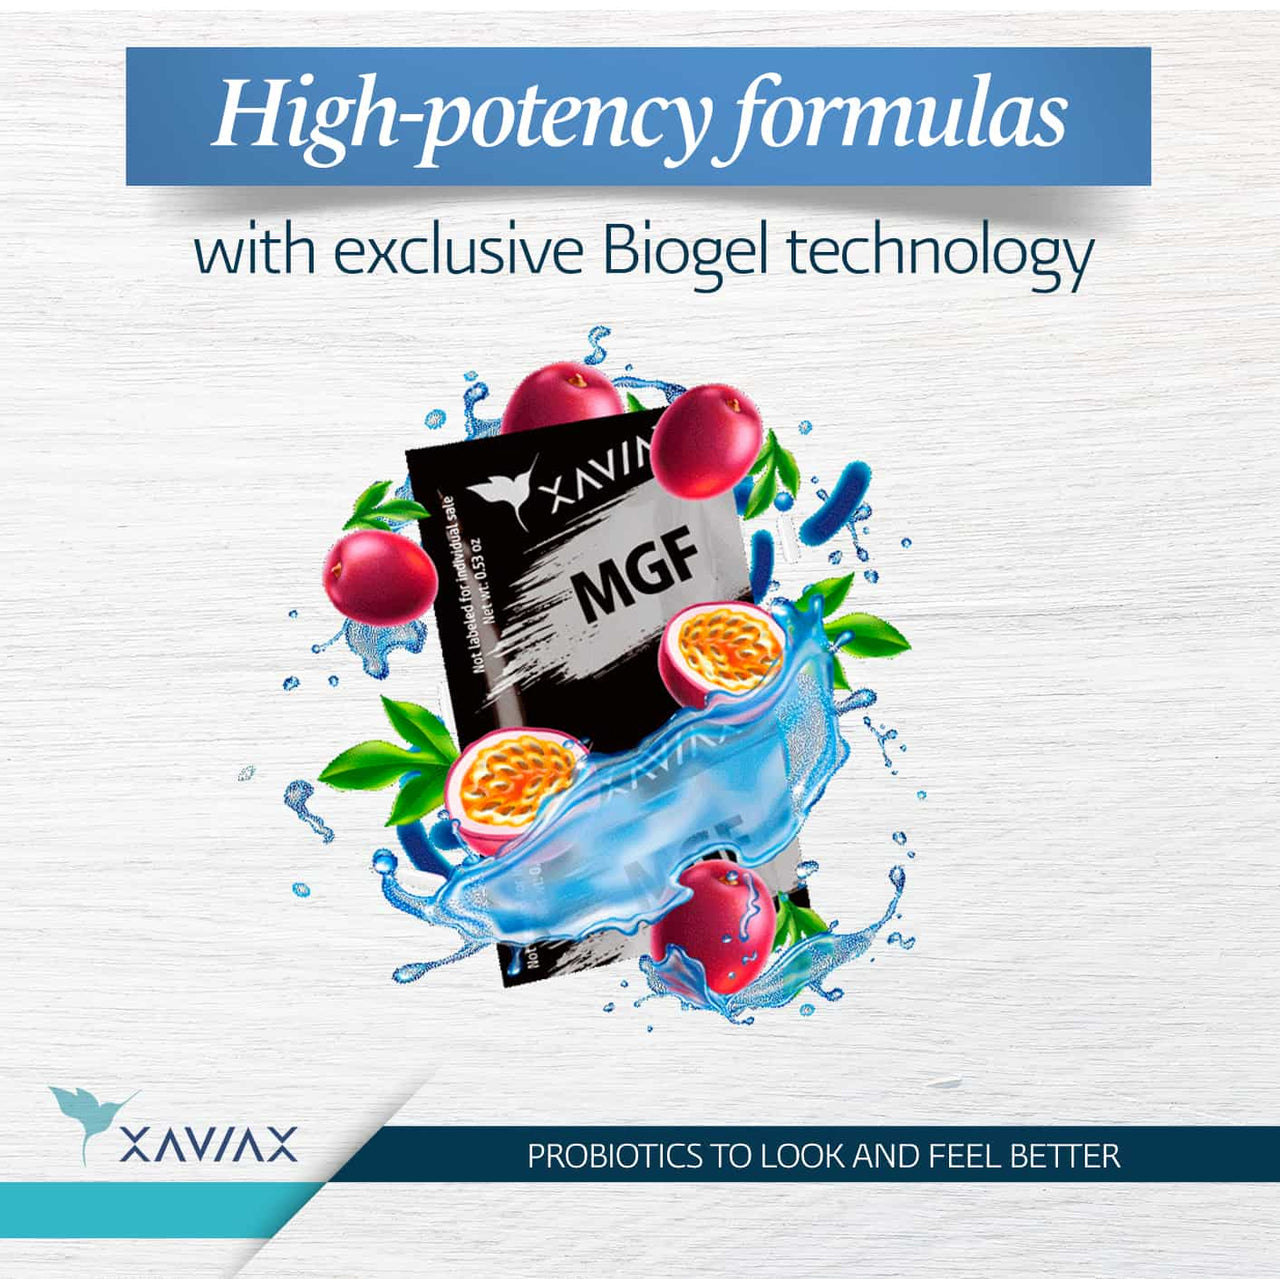 mgf high potency formulas with exclusive biogel technology